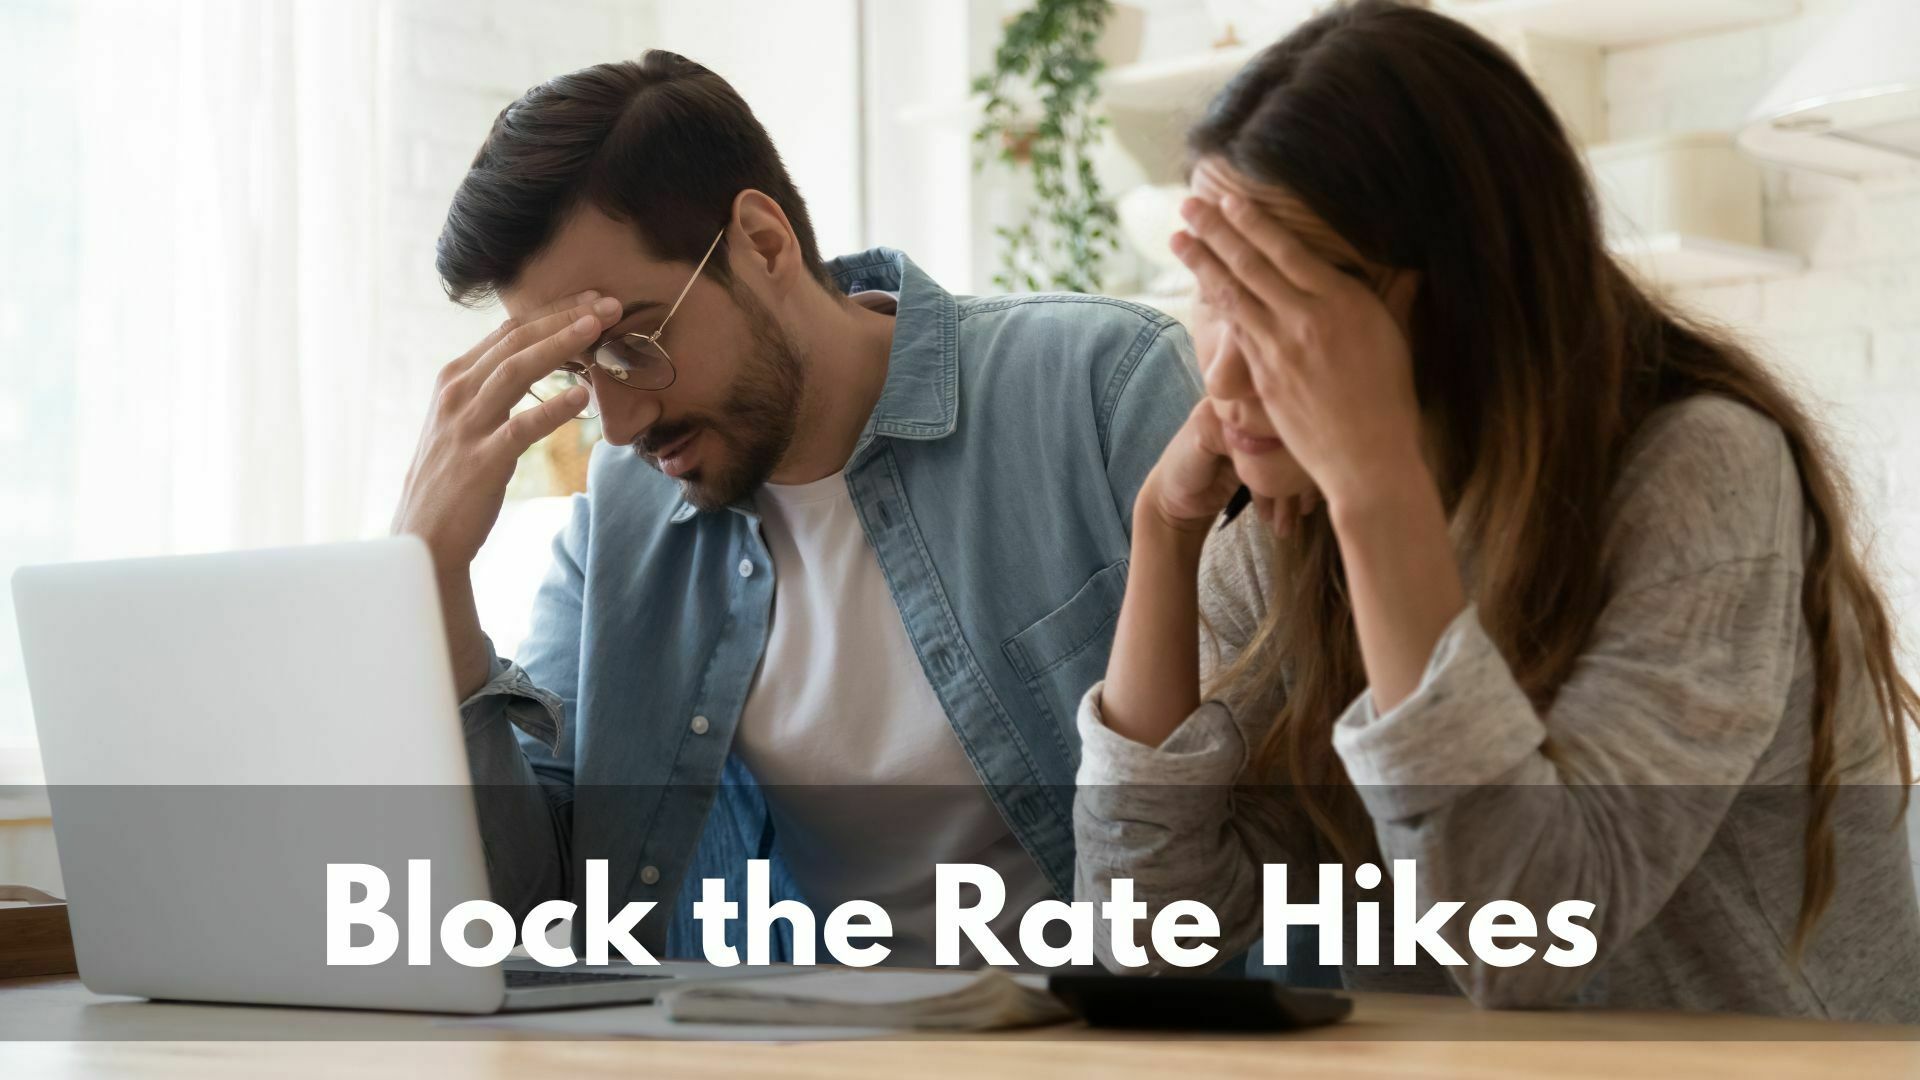 Block the rate hikes 1920x1080